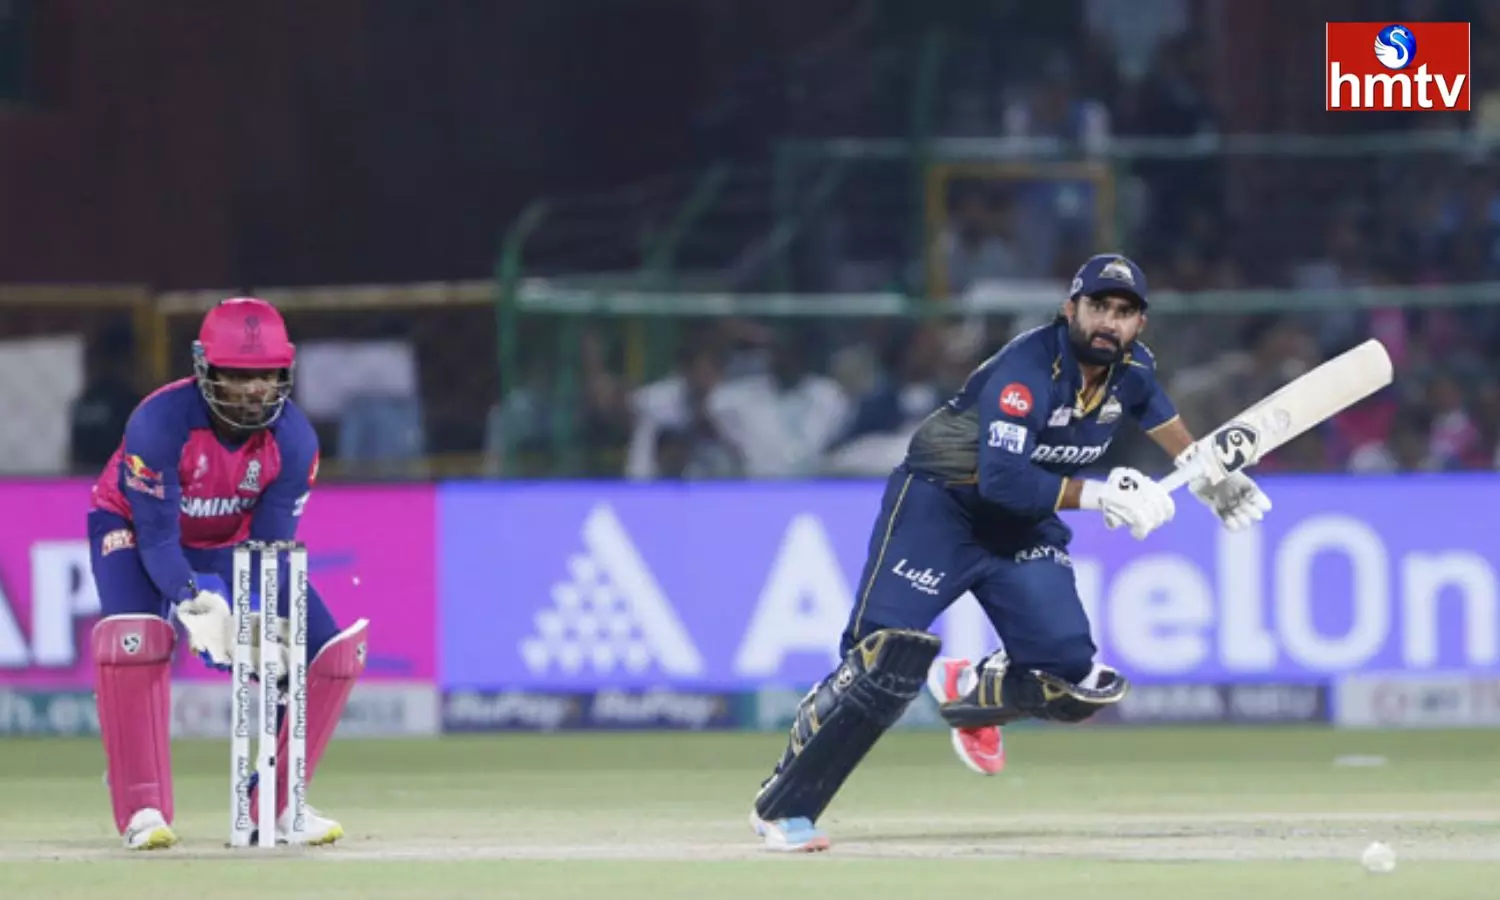 Gujarat Titans beat Rajasthan Royals by 3 wickets